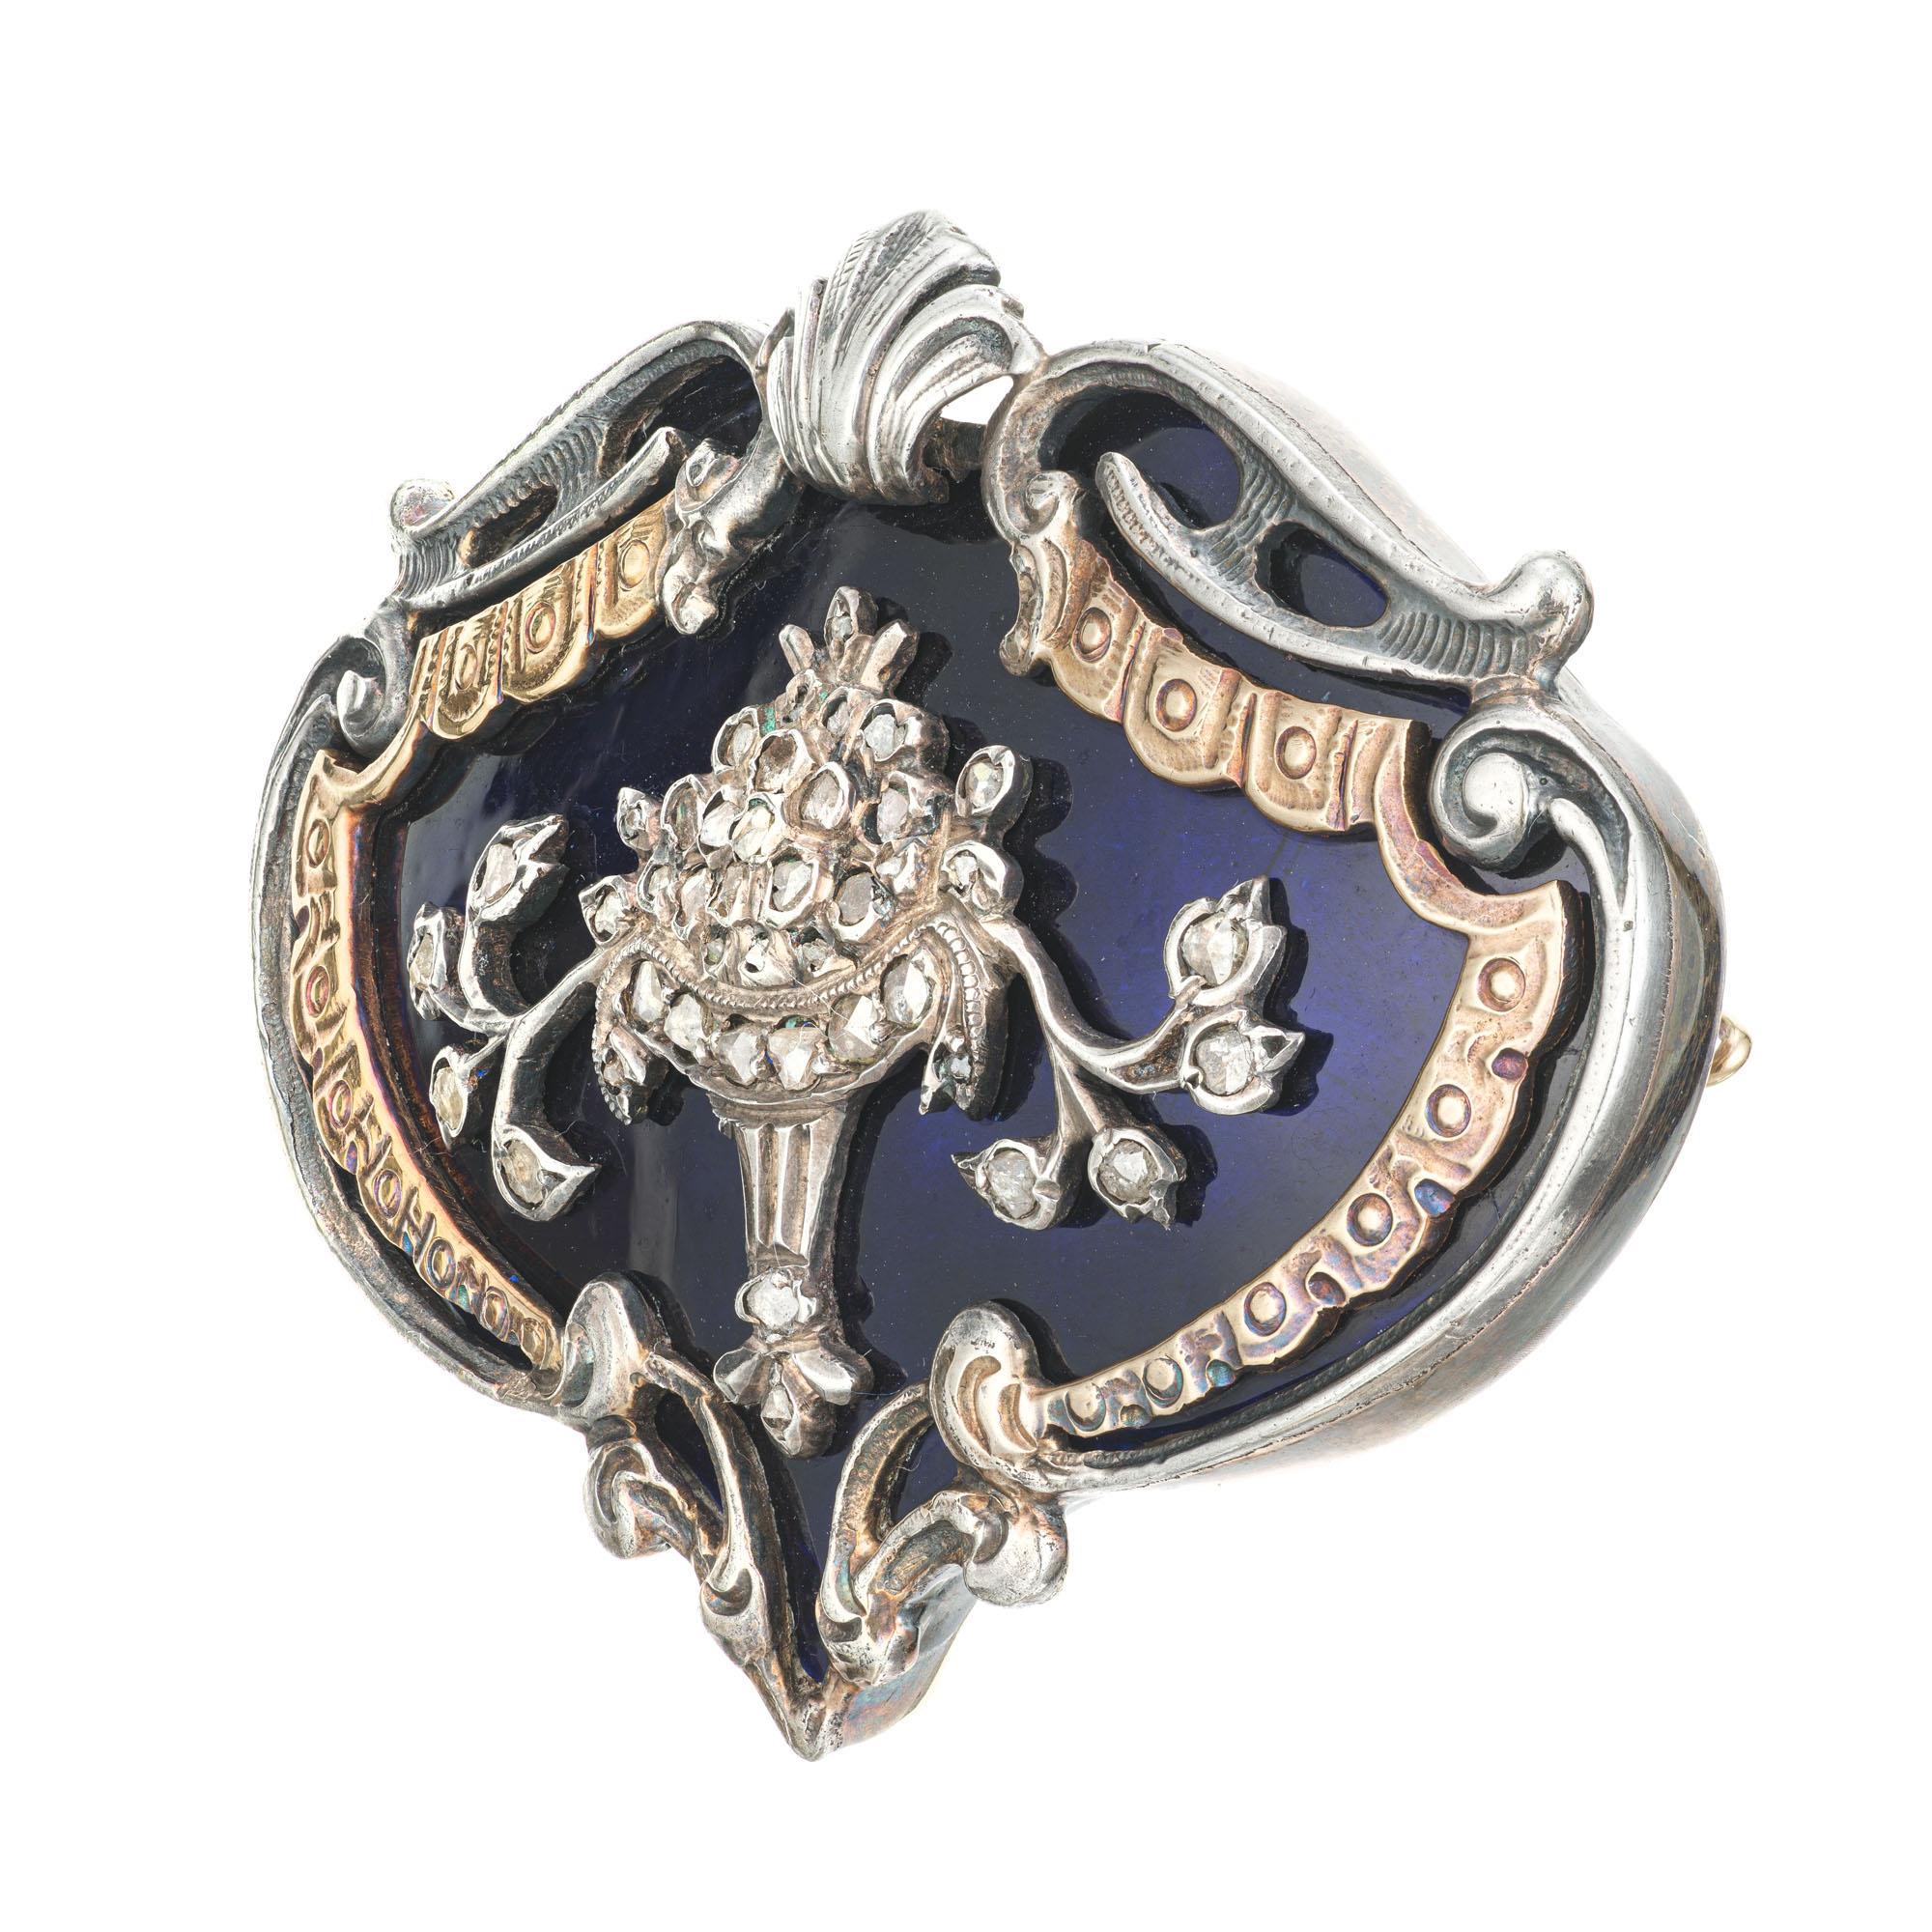 Handmade early 1800's Georgian brooch with hand engraving, rose cut diamonds set in silver on 14k gold. Blue enamel background and floral design. 

36 rose cut diamonds, approx. total weight .15cts, H-I, SI - I
14k Yellow gold
24.3 grams
Tested: 14k